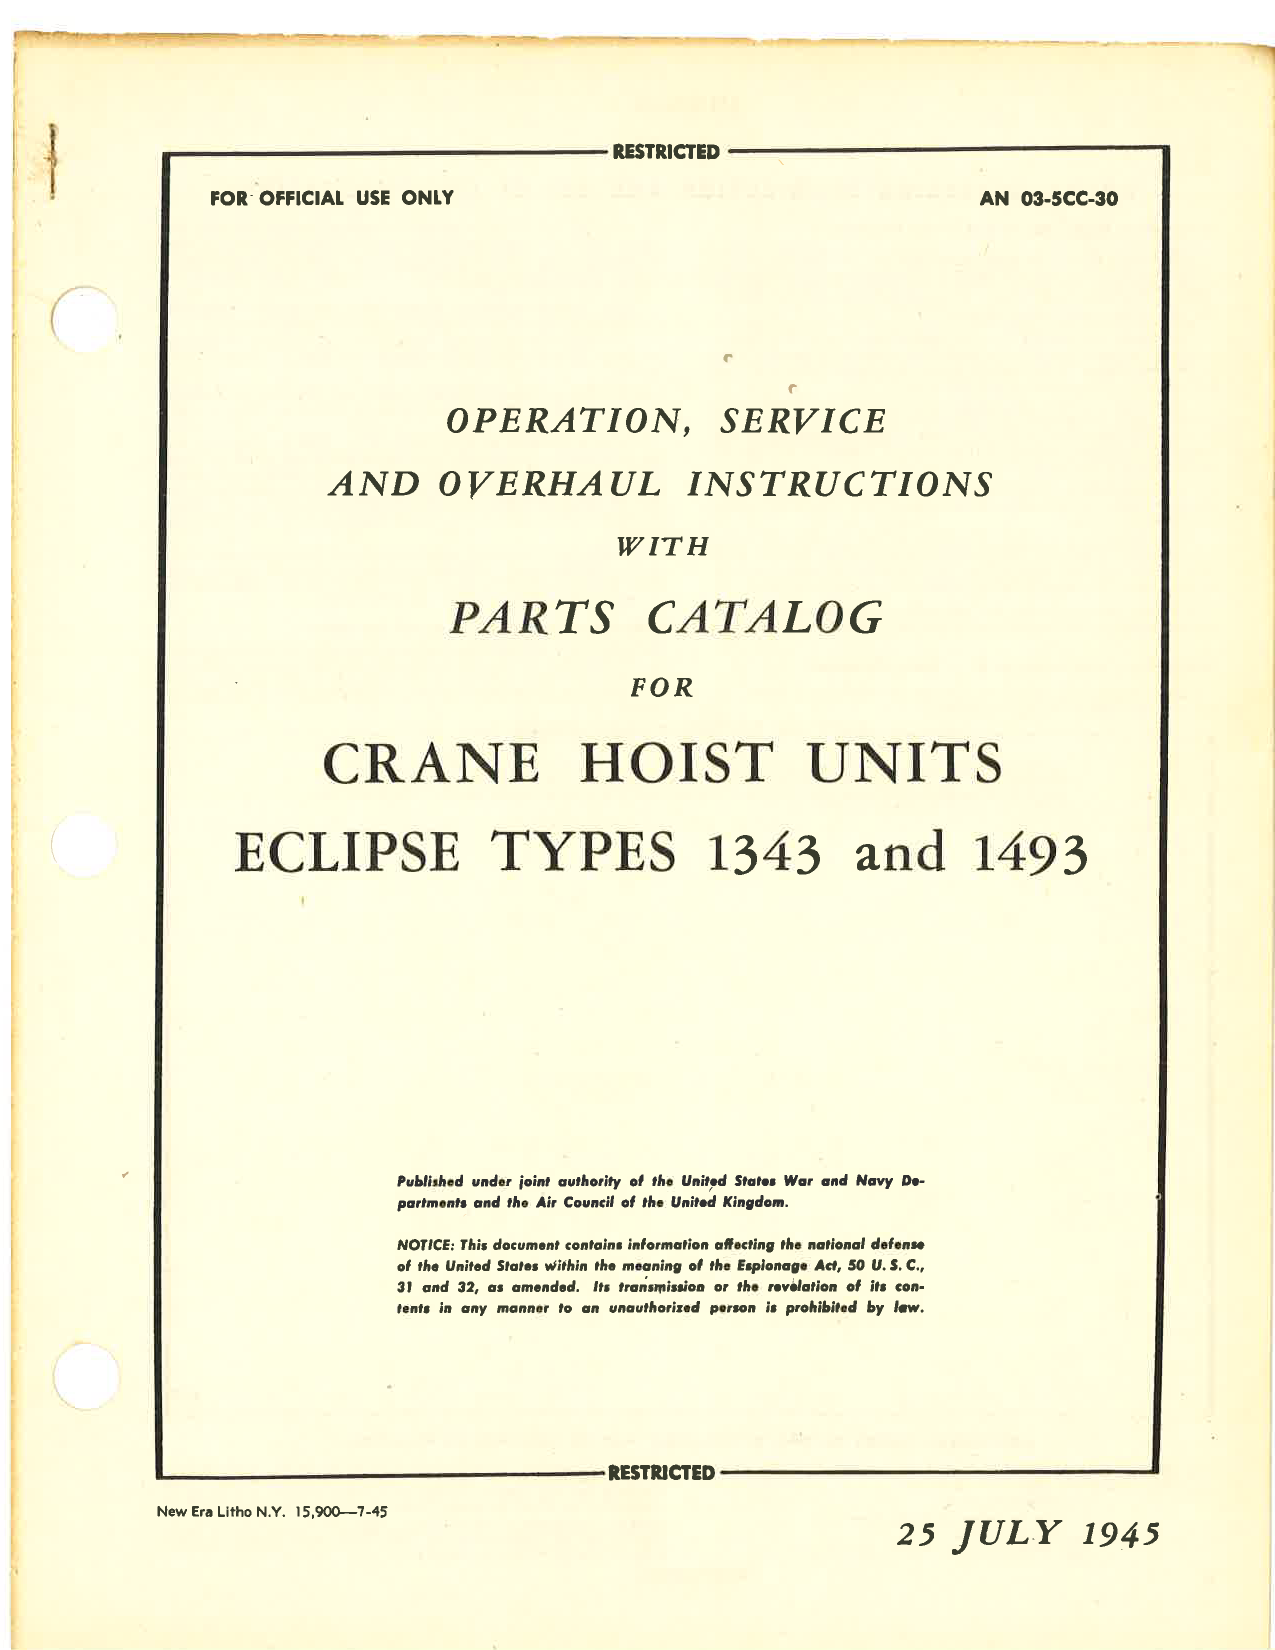 Sample page 1 from AirCorps Library document: Operation, Service & Overhaul Instructions with Parts Catalog for Crane Hoist Units